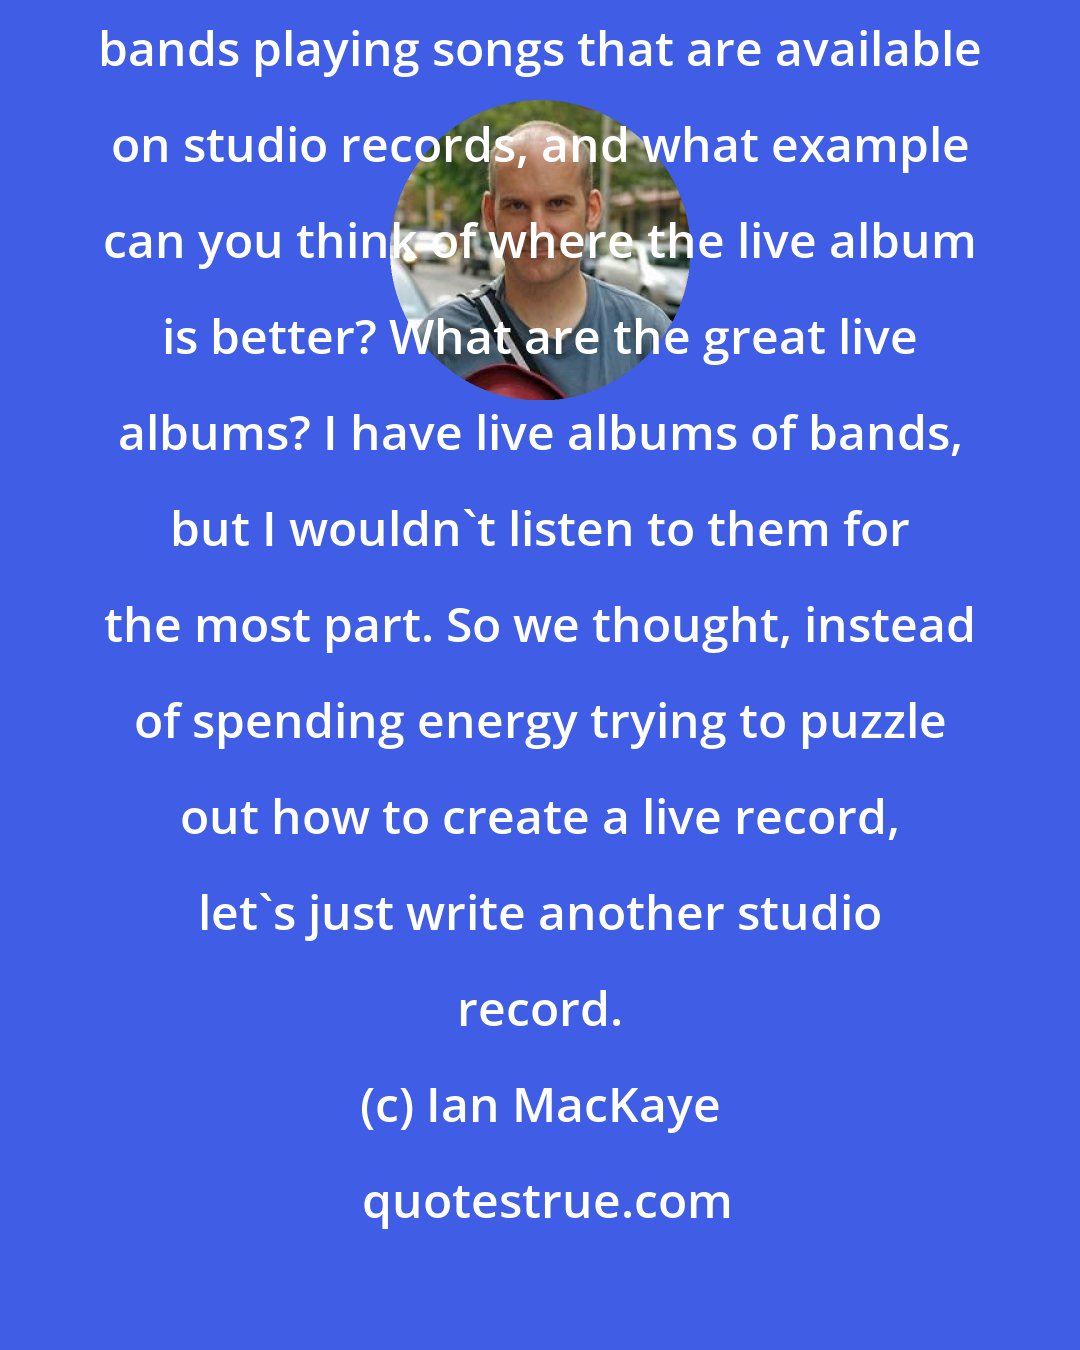 Ian MacKaye: Guy Picciotto had a really sound point: Live albums basically have bands playing songs that are available on studio records, and what example can you think of where the live album is better? What are the great live albums? I have live albums of bands, but I wouldn't listen to them for the most part. So we thought, instead of spending energy trying to puzzle out how to create a live record, let's just write another studio record.